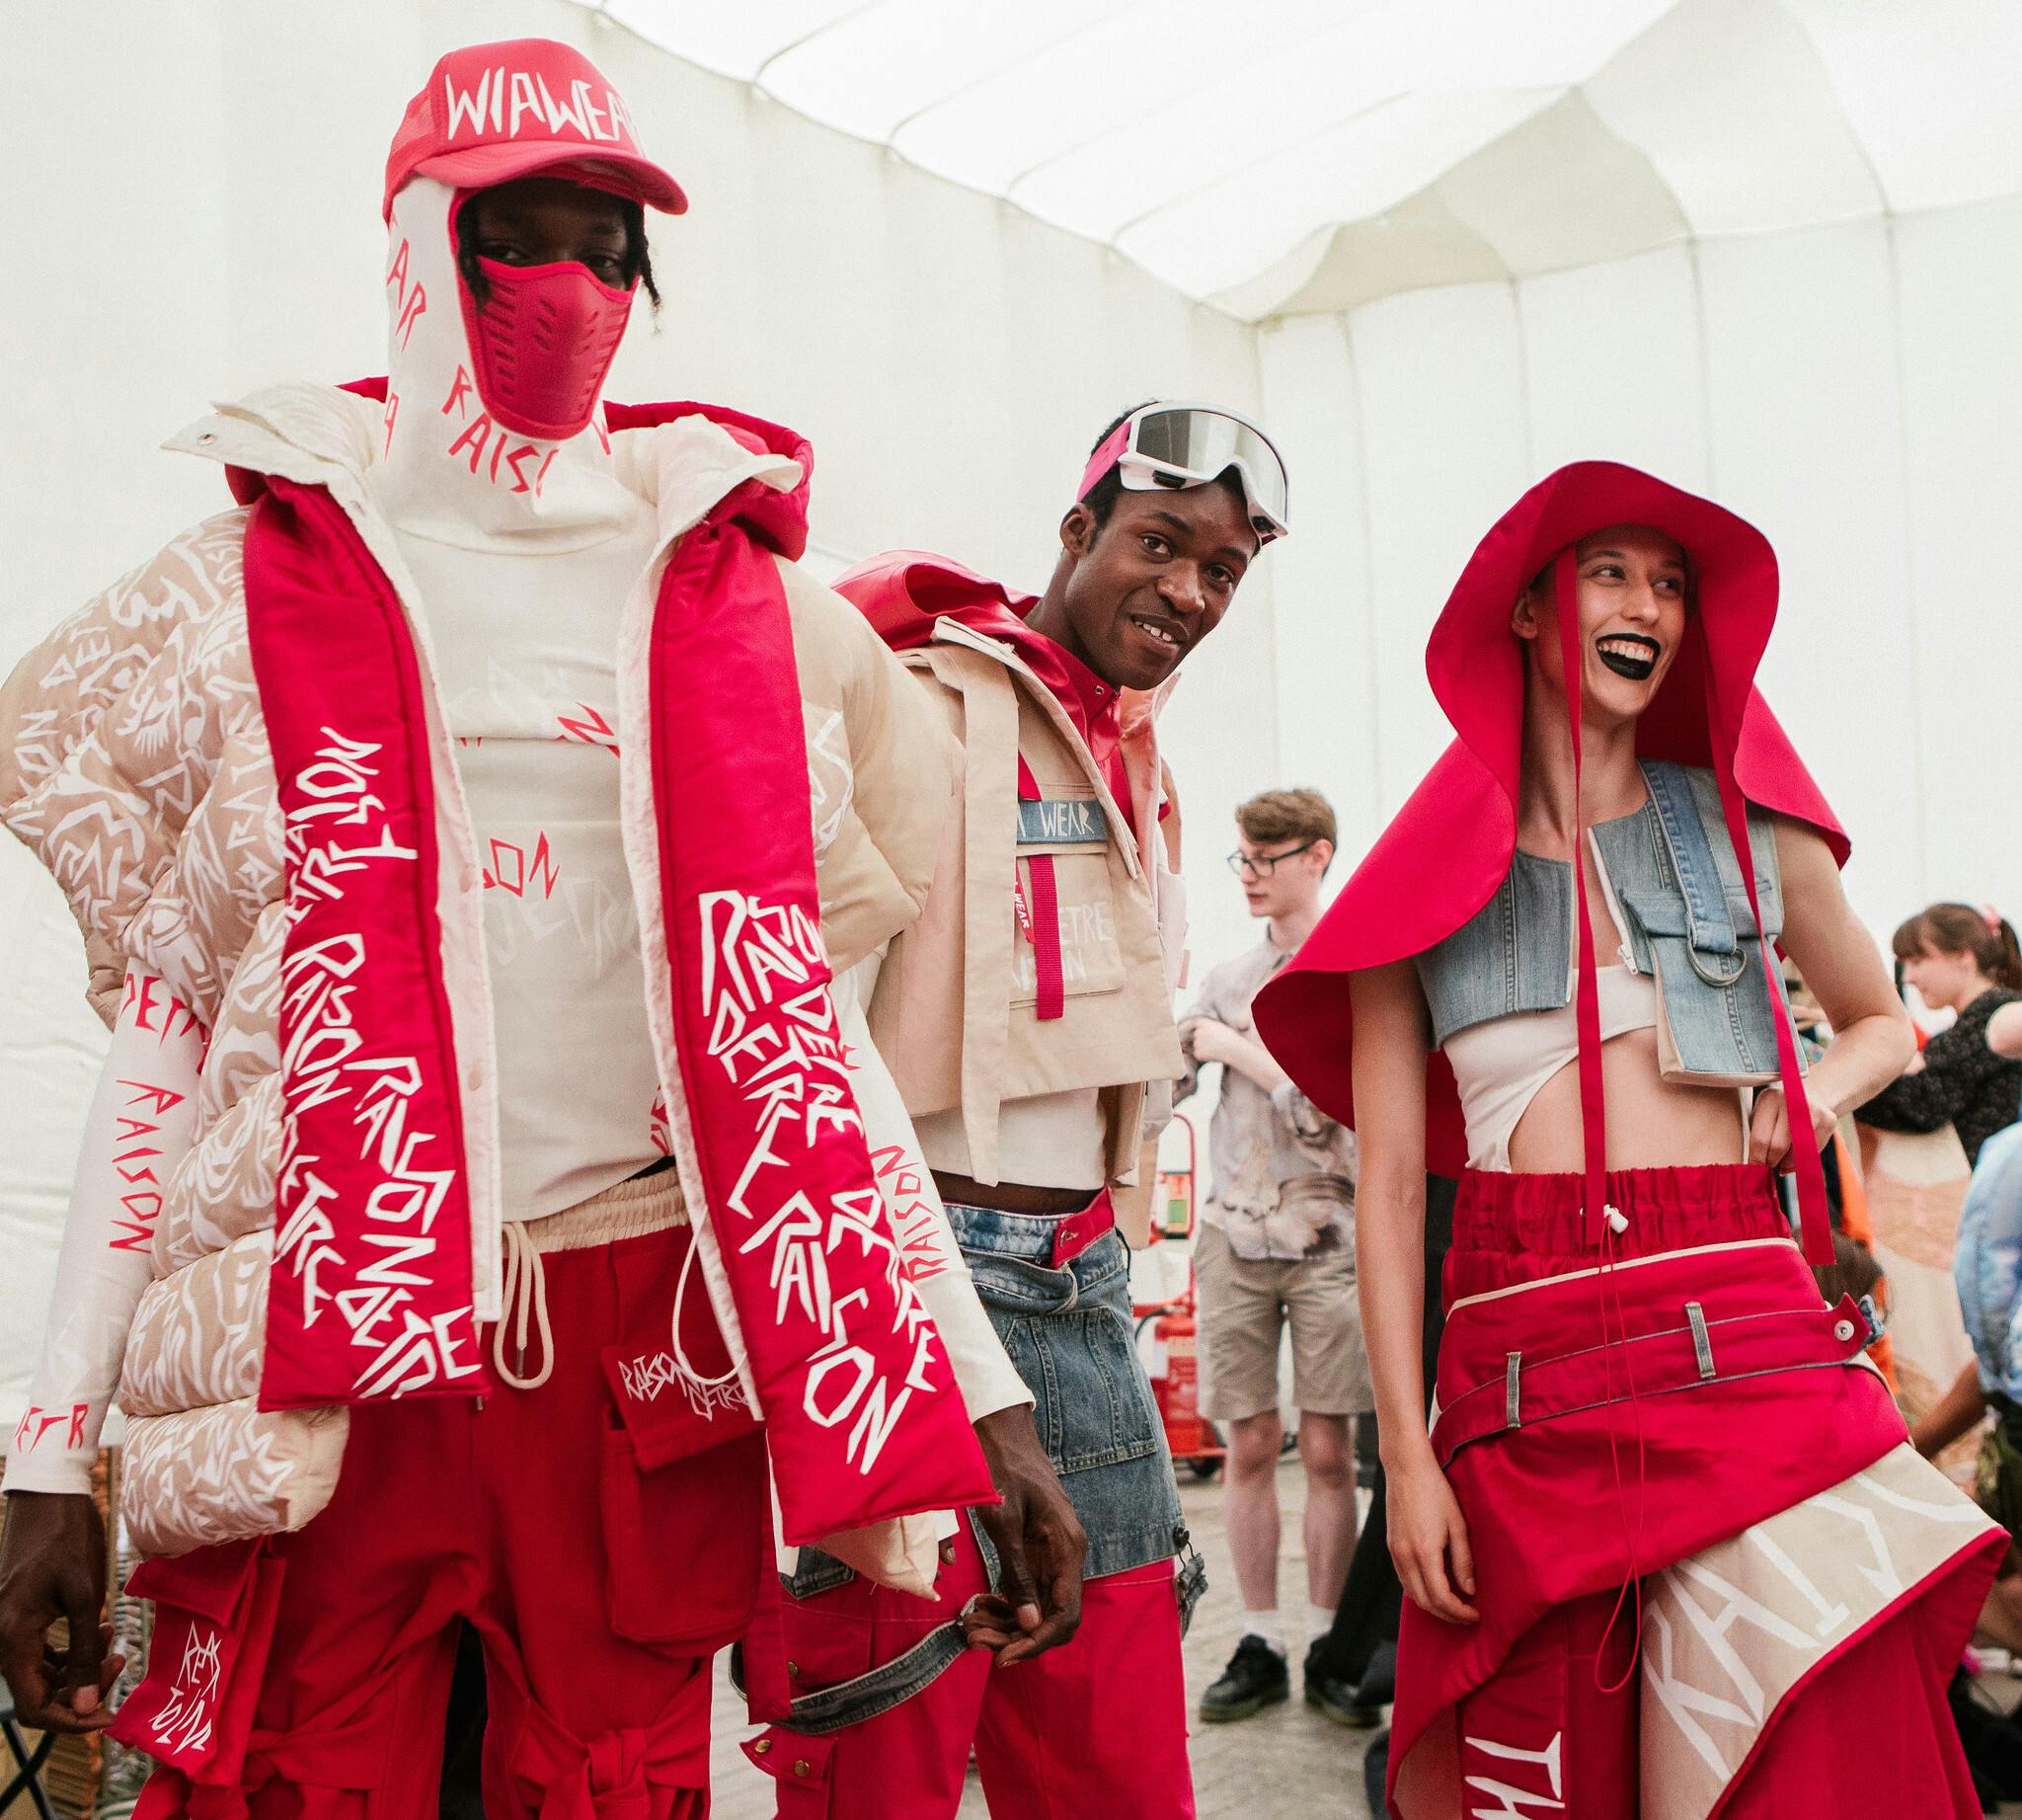 Oliwia Nowotnik's Wia Wear backstage at the London Graduate Fashion Week. The three models are wearing red and white street wear with bold white graphics characteristic of Oliwia's design.